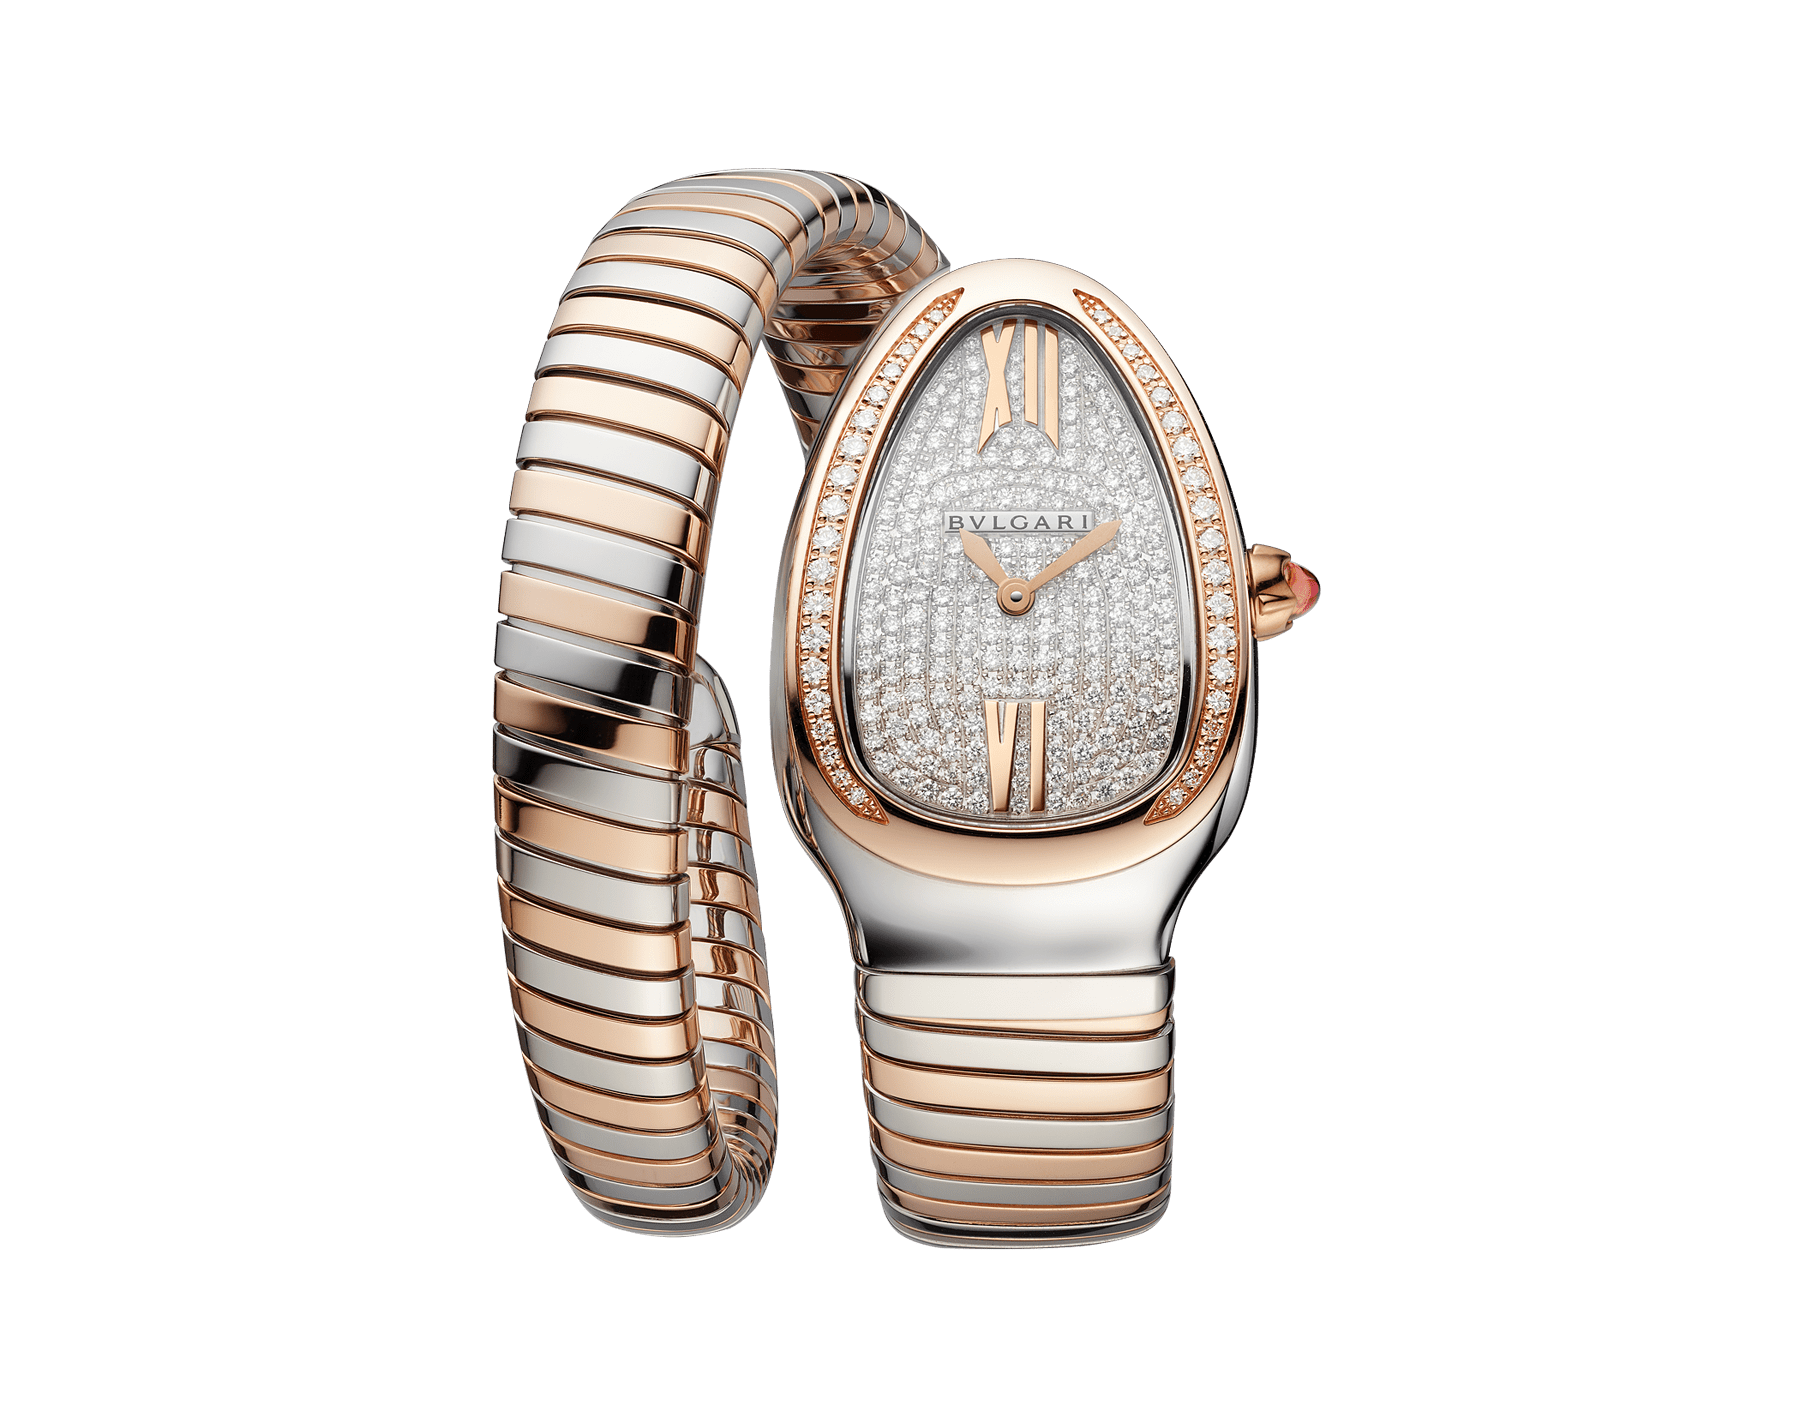 Serpenti Tubogas single spiral watch with stainless steel case, 18 kt rose gold bezel set with round brilliant-cut diamonds, full pavé dial, and bracelet in 18 kt rose gold and stainless steel 103150 image 1